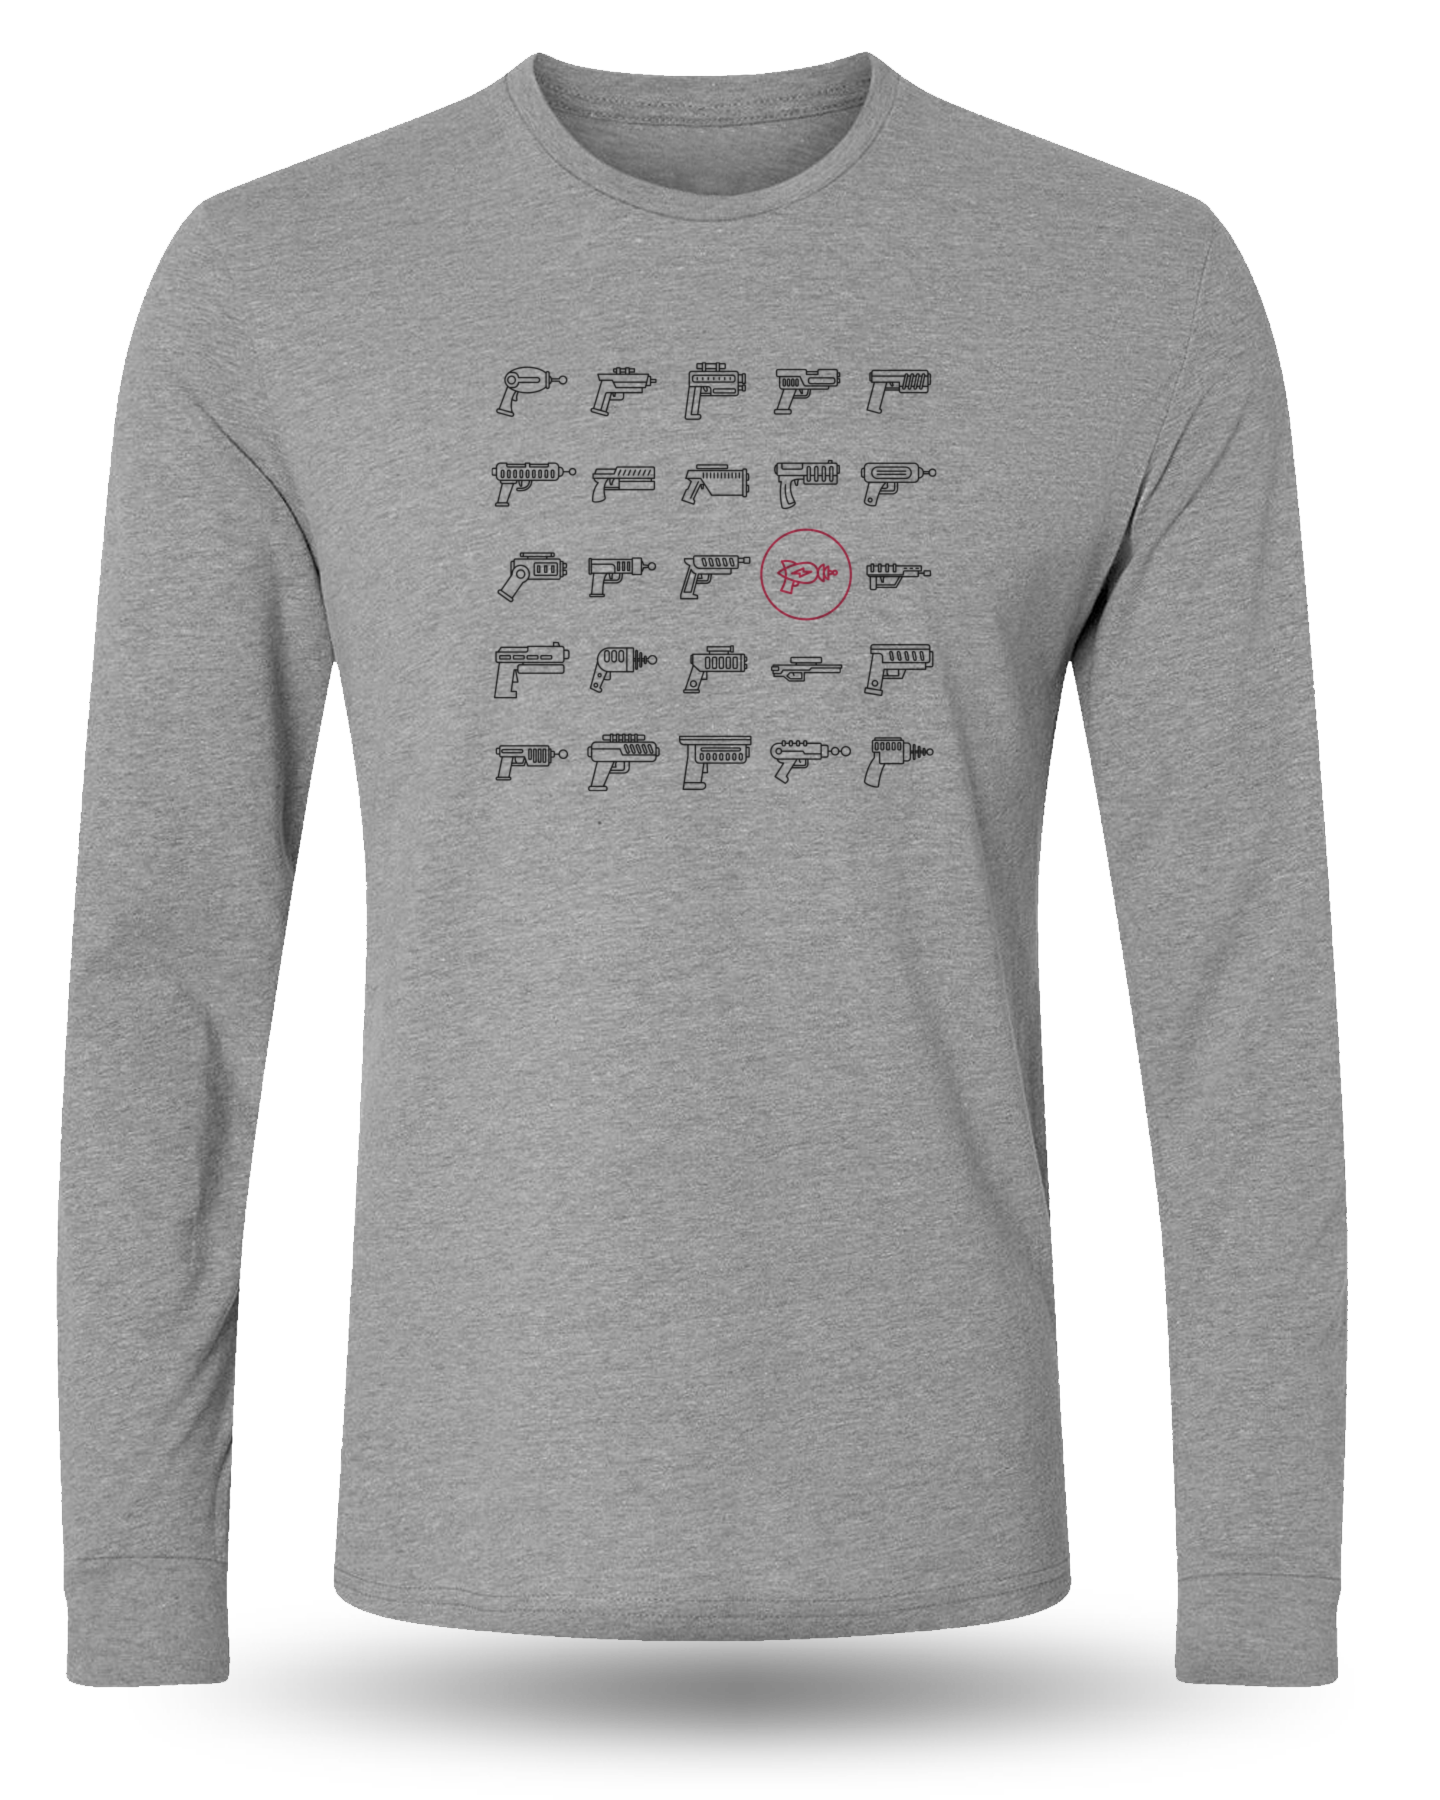 Gray Pew Pew Tactical Retro Laser Tee LONG SLEEVE